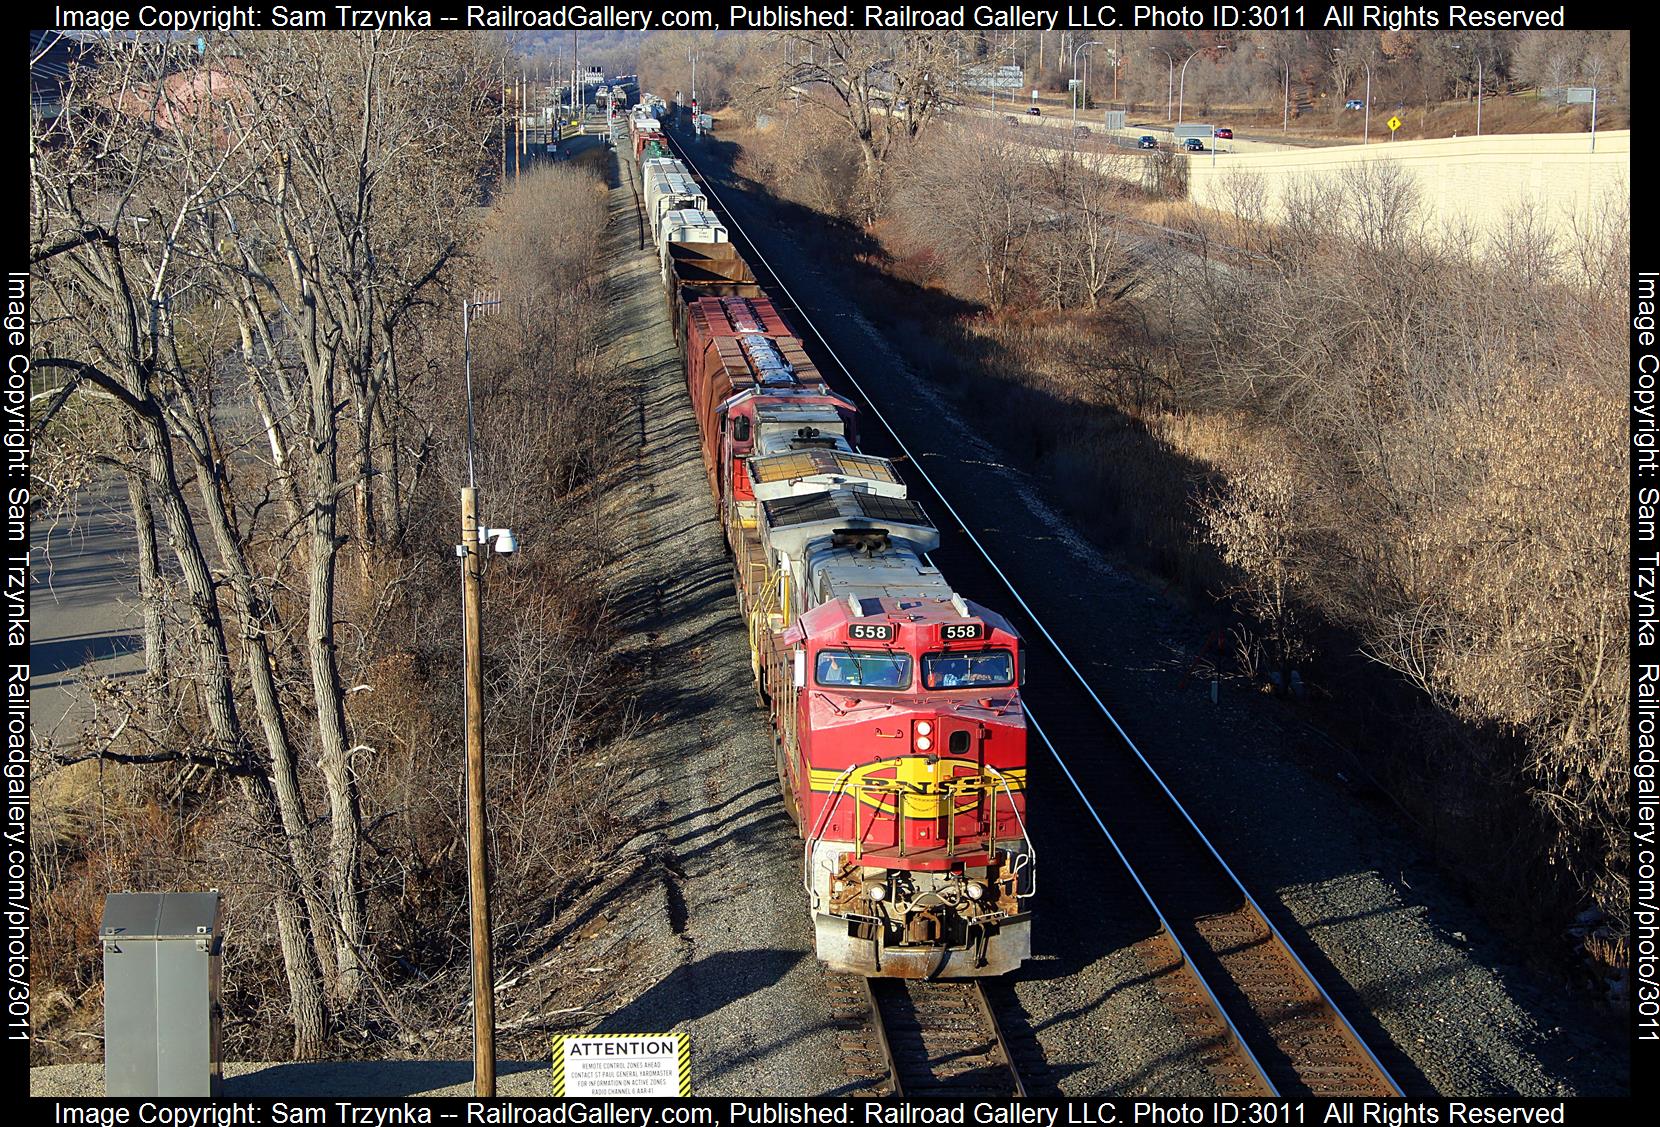 BNSF 558 is a class GE B40-8W (Dash 8-40BW) and  is pictured in Newport, Minnesota, USA.  This was taken along the BNSF St. Paul Subdivision on the BNSF Railway. Photo Copyright: Sam Trzynka uploaded to Railroad Gallery on 01/22/2024. This photograph of BNSF 558 was taken on Wednesday, December 20, 2023. All Rights Reserved. 